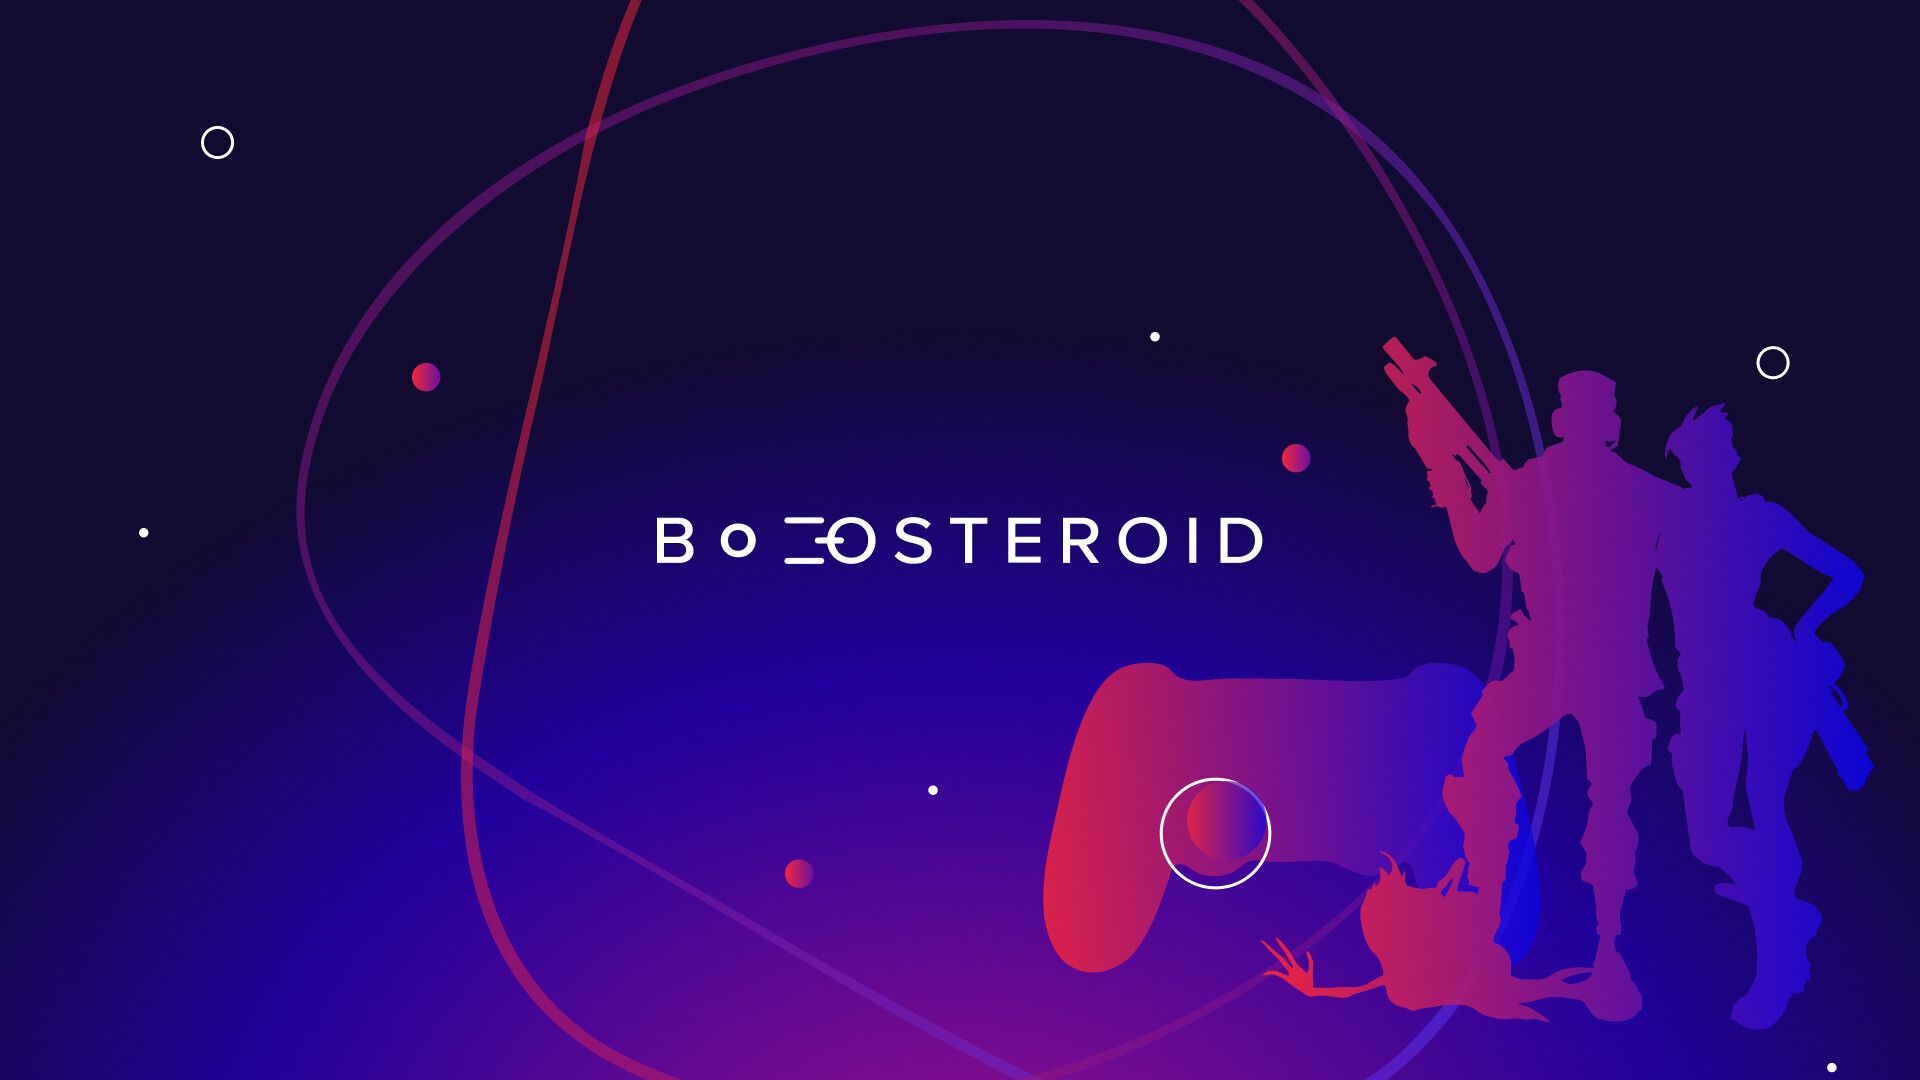 Boosteroid Cloud Gaming Aims to Bring the Best Cloud Gaming